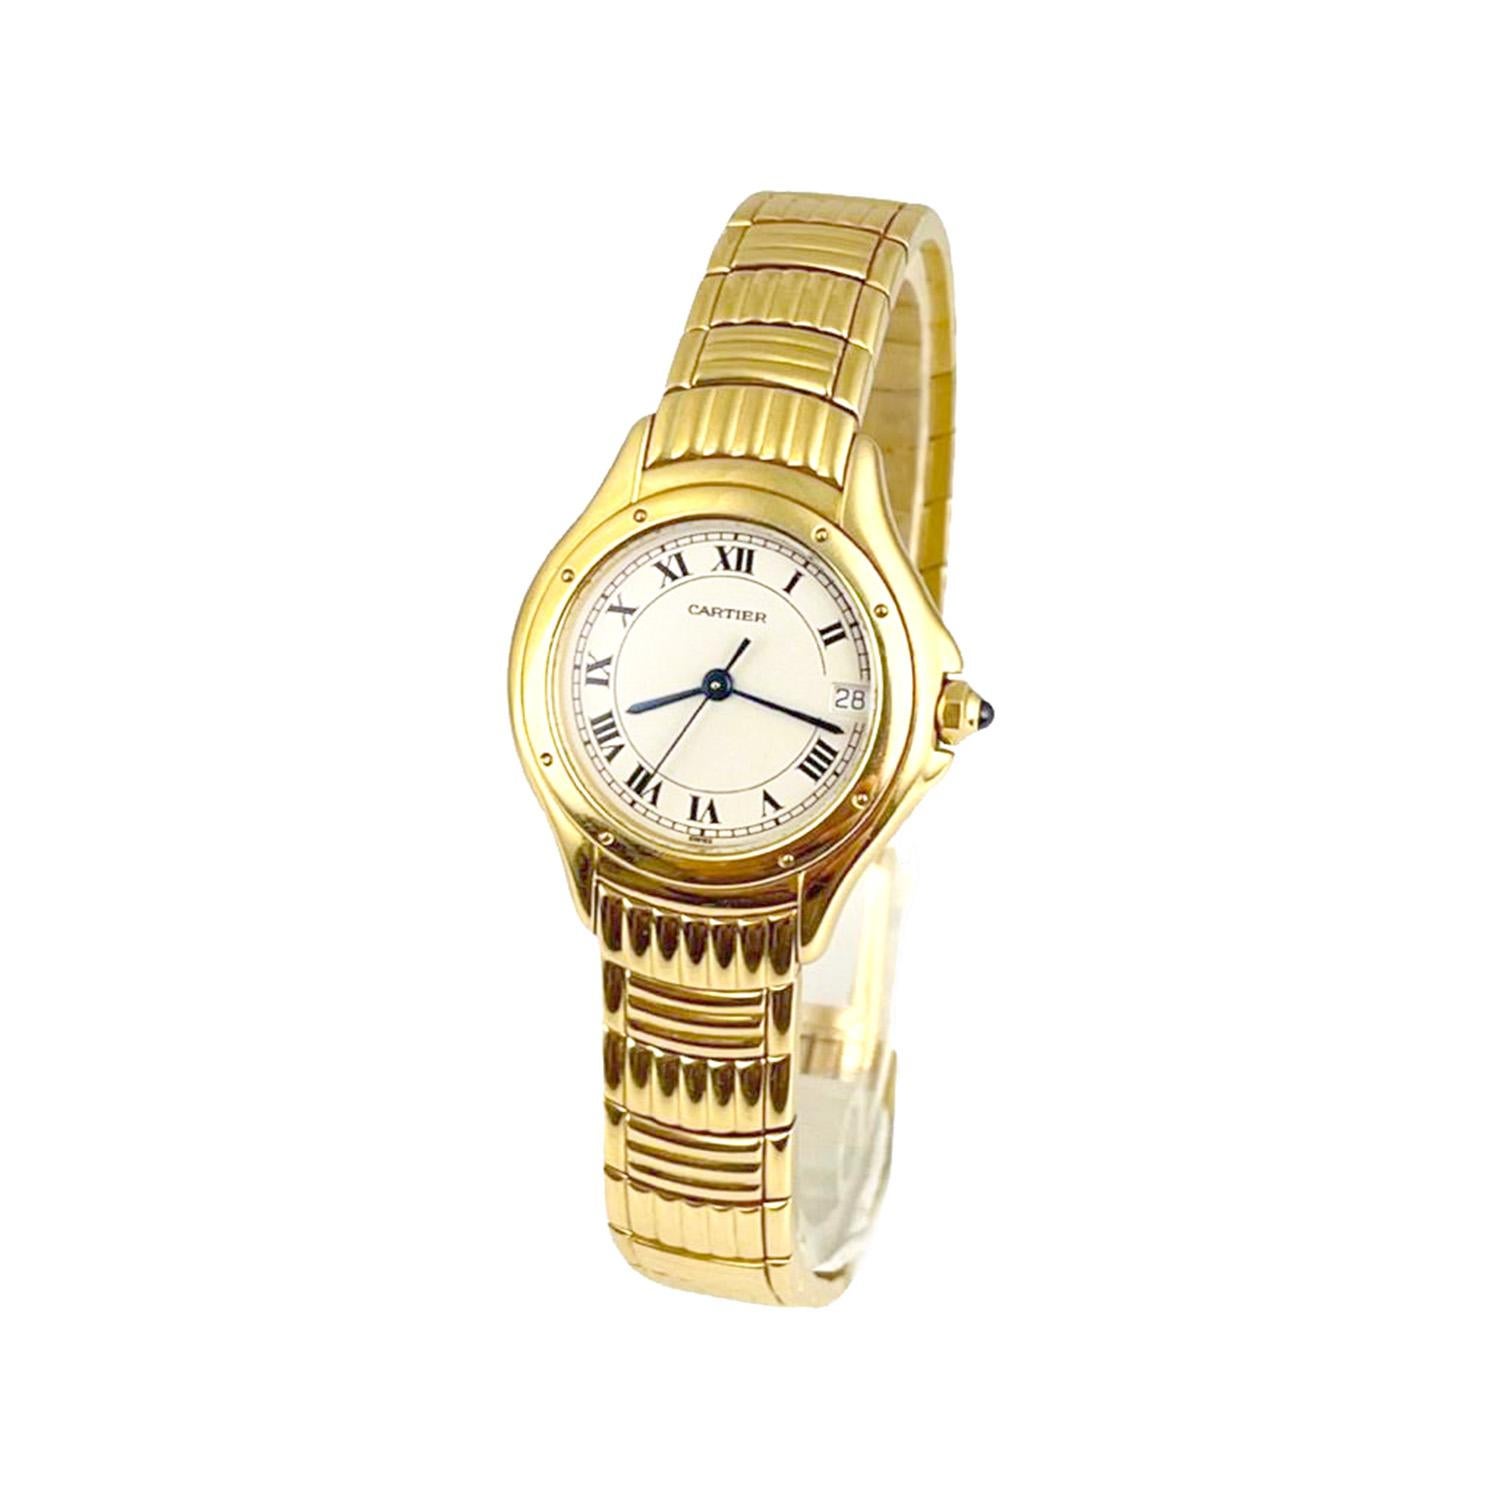 The Vintage Cartier Cougar Date with the classic white roman numeral dial. This watch is in excellent condition.

Brand: Cartier

Model: Cougar

Ref. : 11701

Metal: Yellow Gold

Metal Purity: 18k

Movement: Quartz

Case Size:  26 mm

Wrist Size: 6